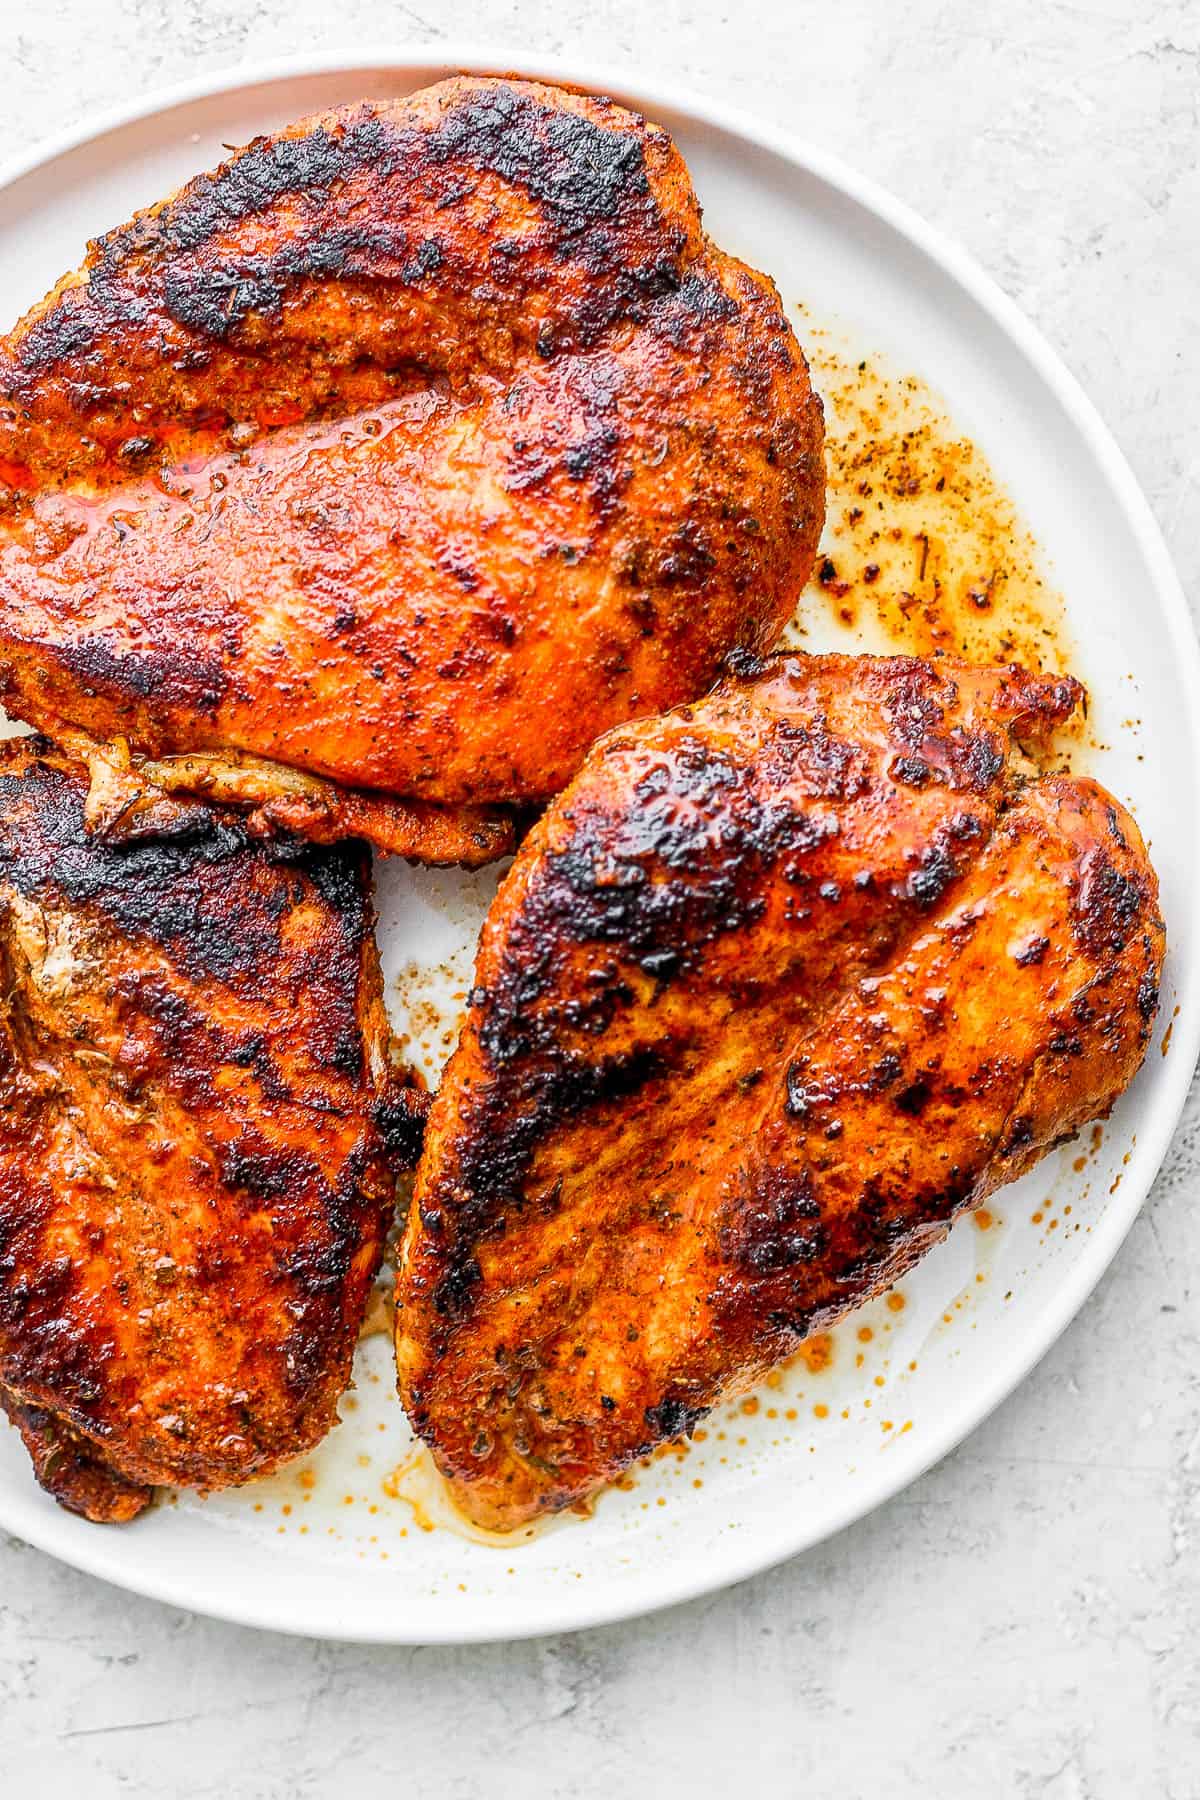 Blackened chicken breasts on a plate.